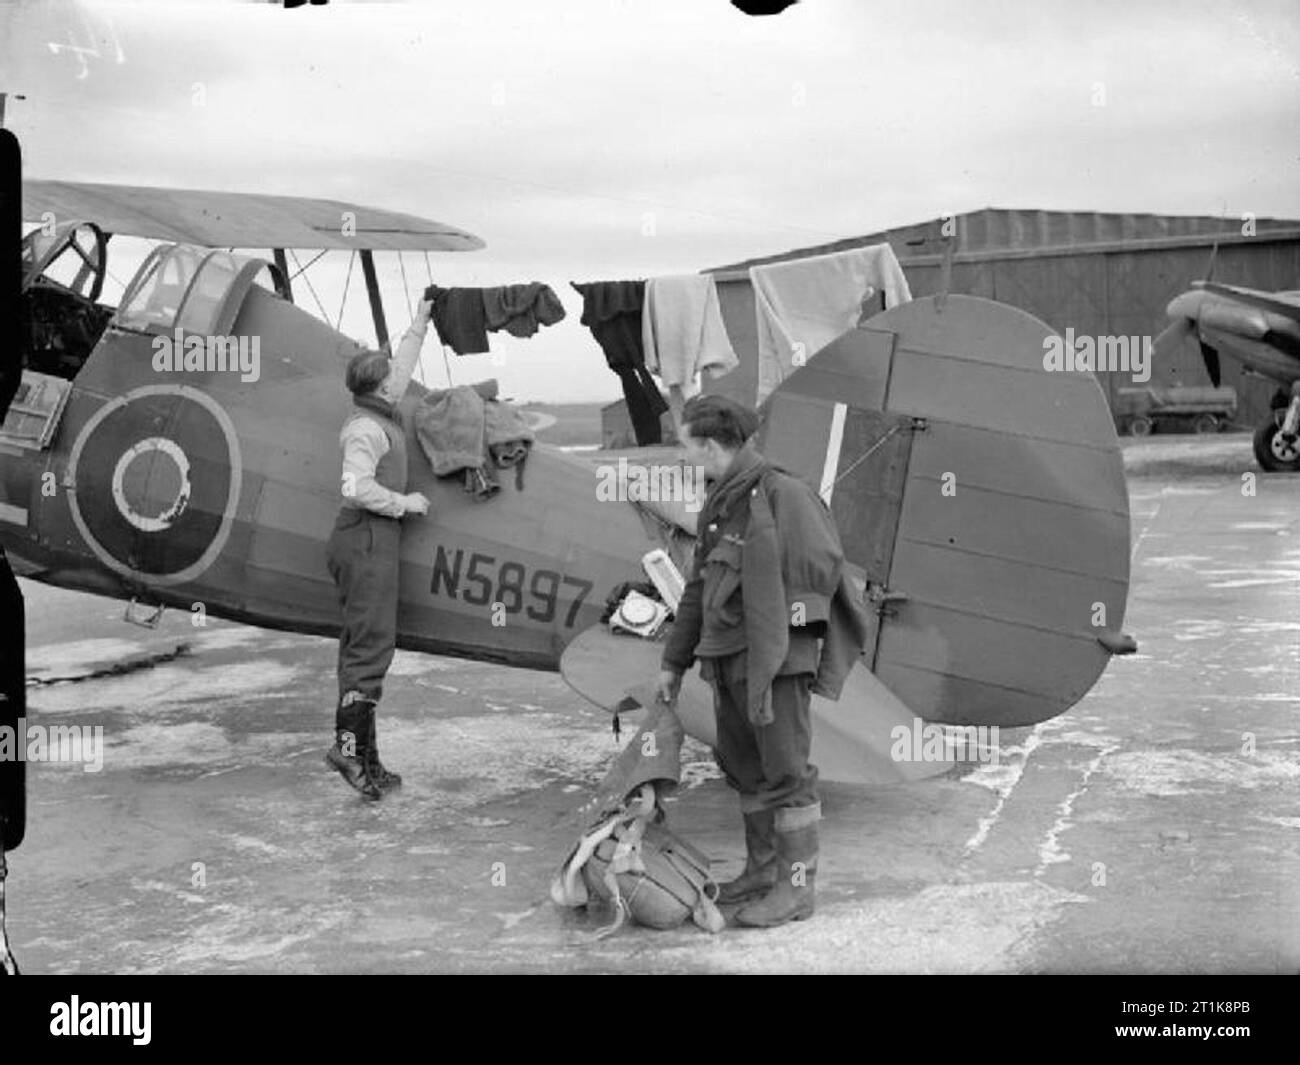 Royal Air Force Coastal Command, 1939-1945. A meteorological pilot, Flying Officer J B Gordon of No. 521 Squadron RAF, prepares to don the many layers of clothes he wears for high-altitude weather flying, which are hanging from the radio aerial of his Gloster Gladiator Mark II, N5897 'E', at Bircham Newton, Norfolk. A ground crewman stands by with Gordon's SD jacket and parachute. A psychrometer and an aneroid barometer, which will be attached to the aircraft for the THUM (Temperature and Humidity) flight, have been placed on the elevator. Stock Photo